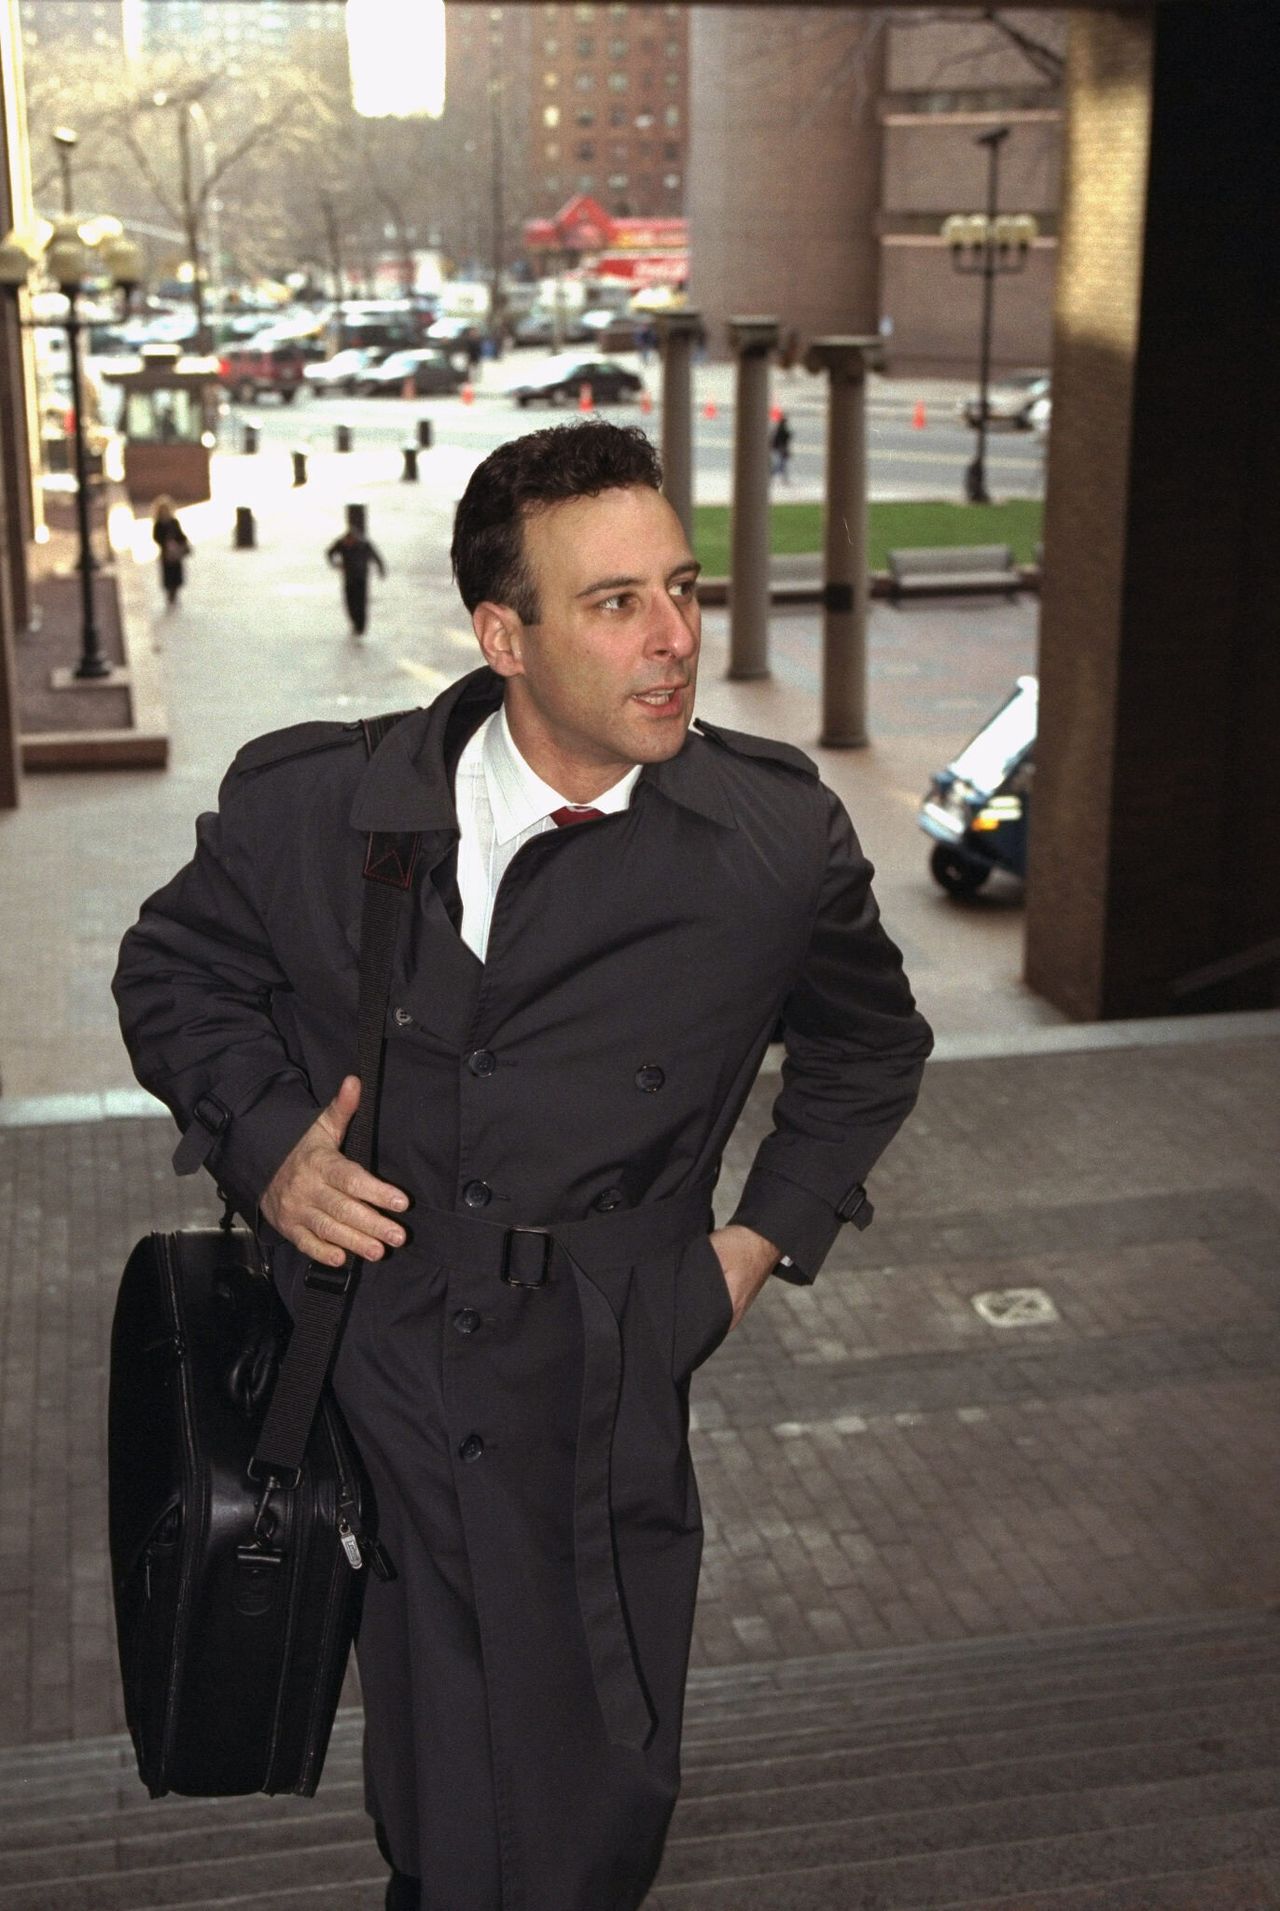  Police Officer Francis Livotti arrives at police headquarters for a departmental hearing on the death of Anthony Baez. (Photo by Mike Albans/NY Daily News Archive via Getty Images)